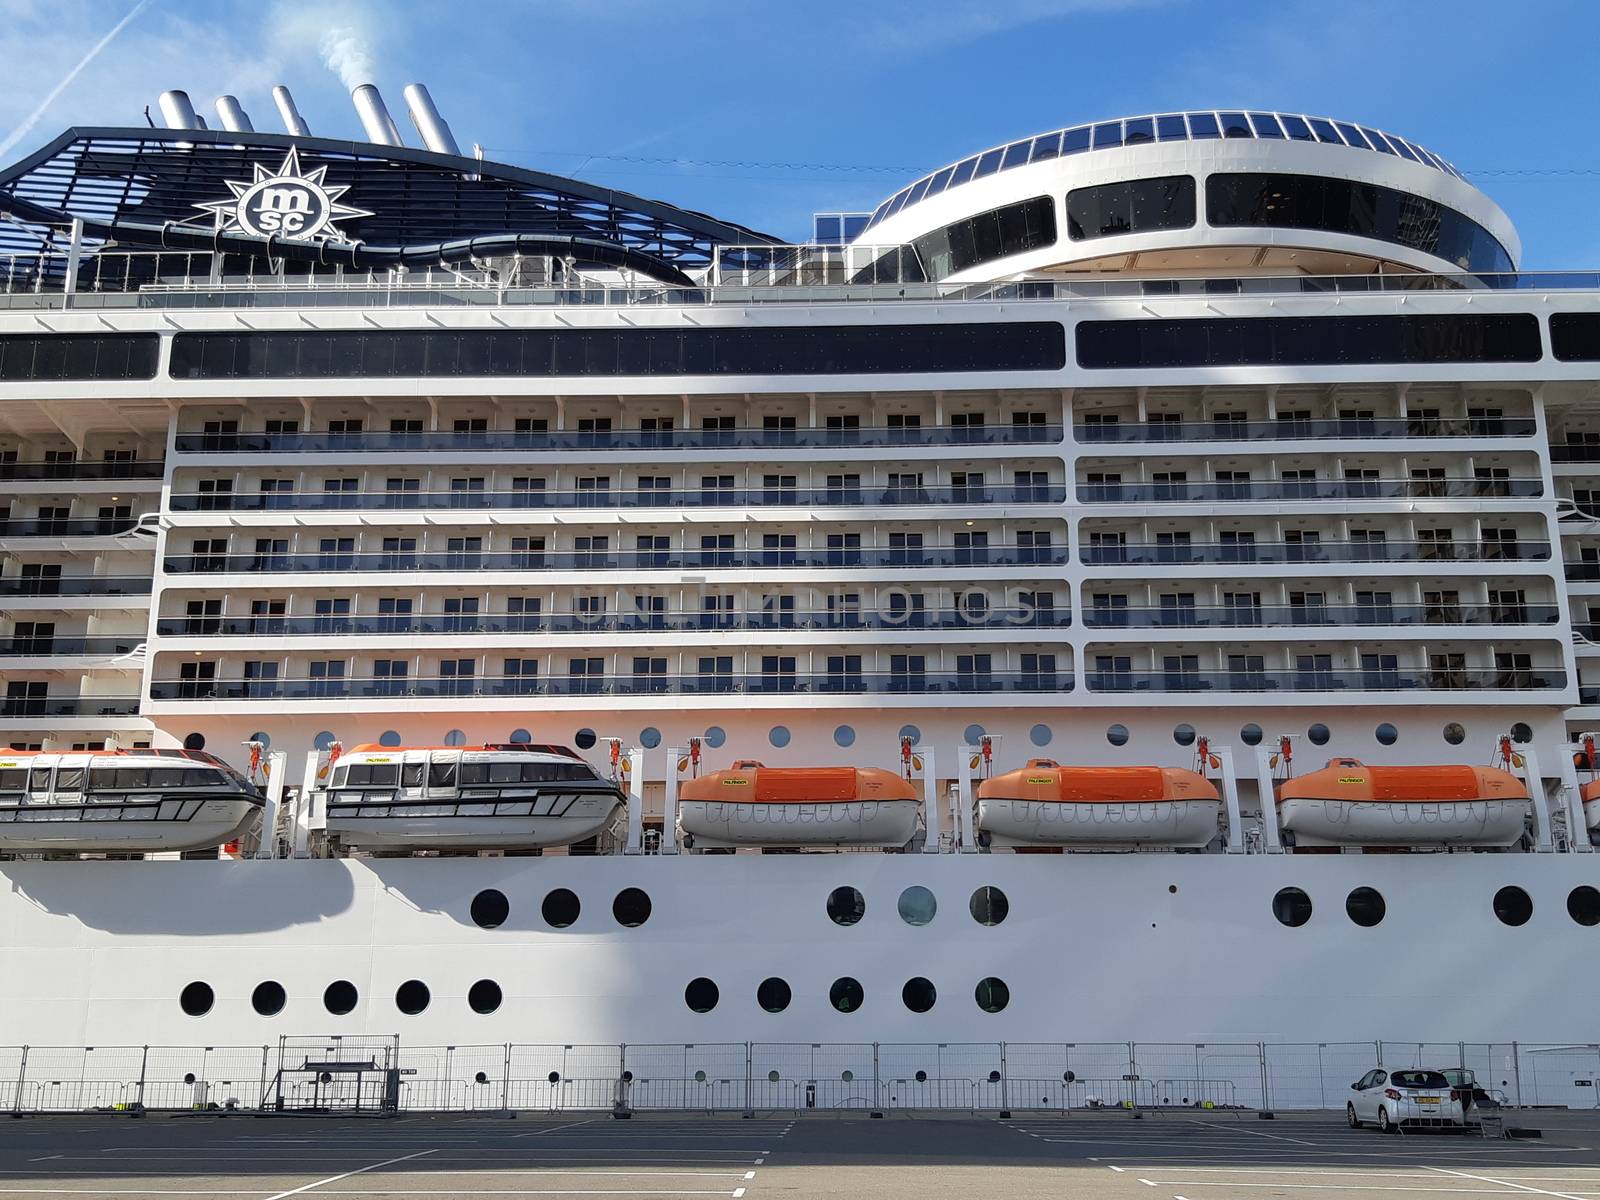 Side view of an MSC Cruise Ship on the quay of Rotterdam Cruise Terminal by kb79